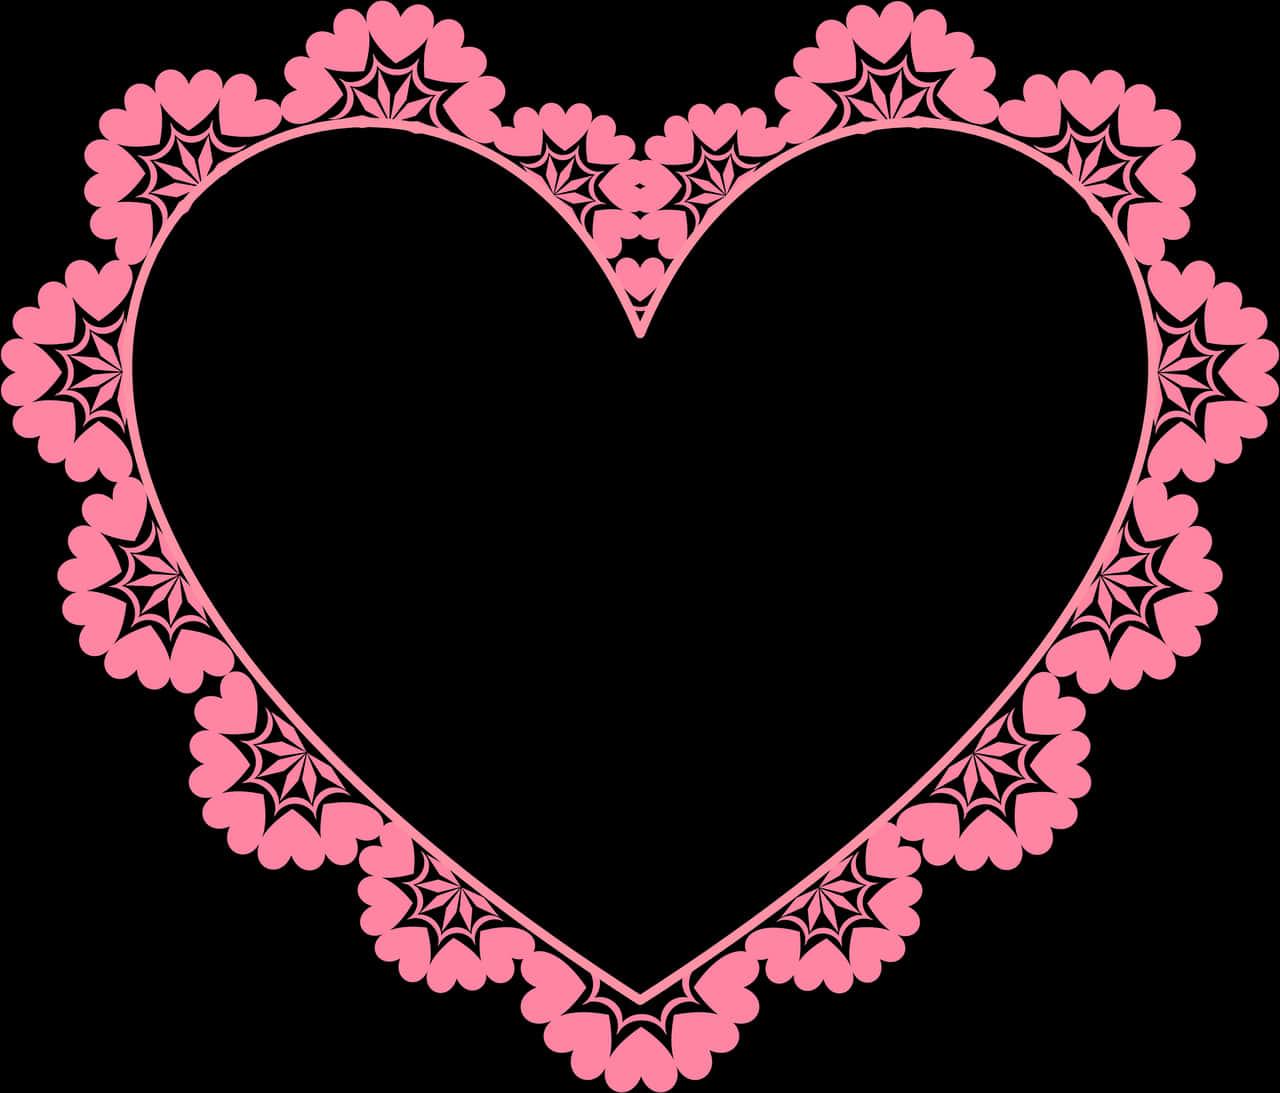 A Heart Shaped Frame With Pink Flowers